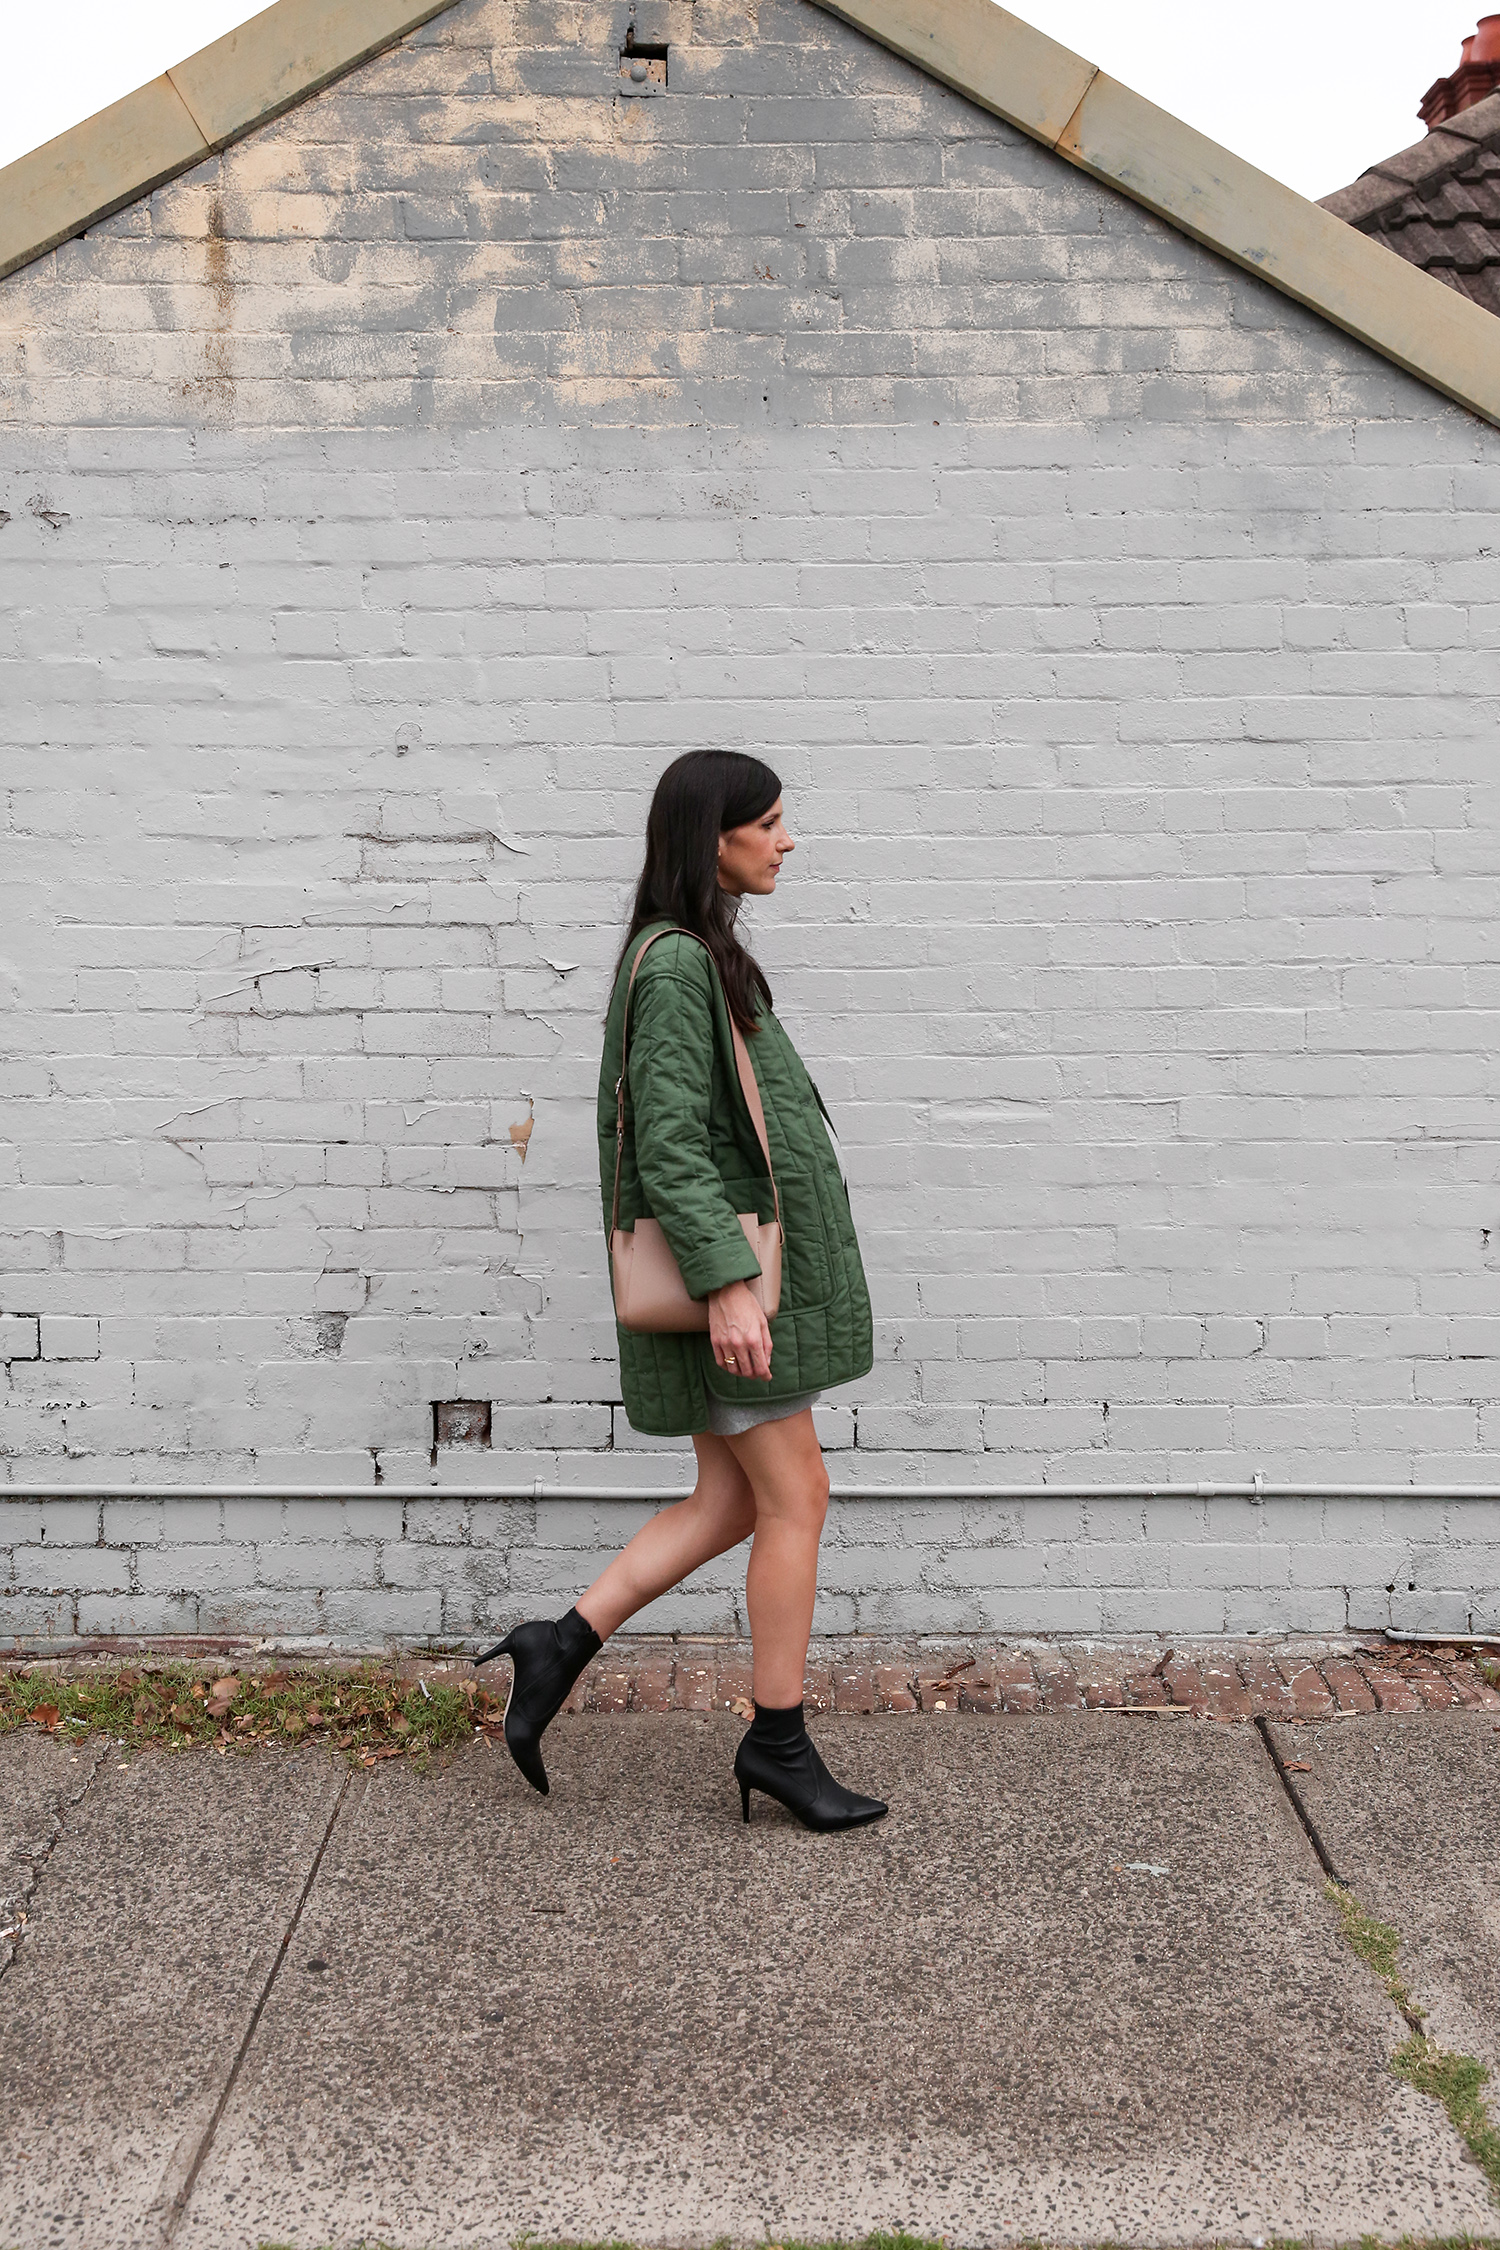 Jamie Lee of Mademoiselle wearing an Everlane cashmere mini dress and cotton quilted jacket